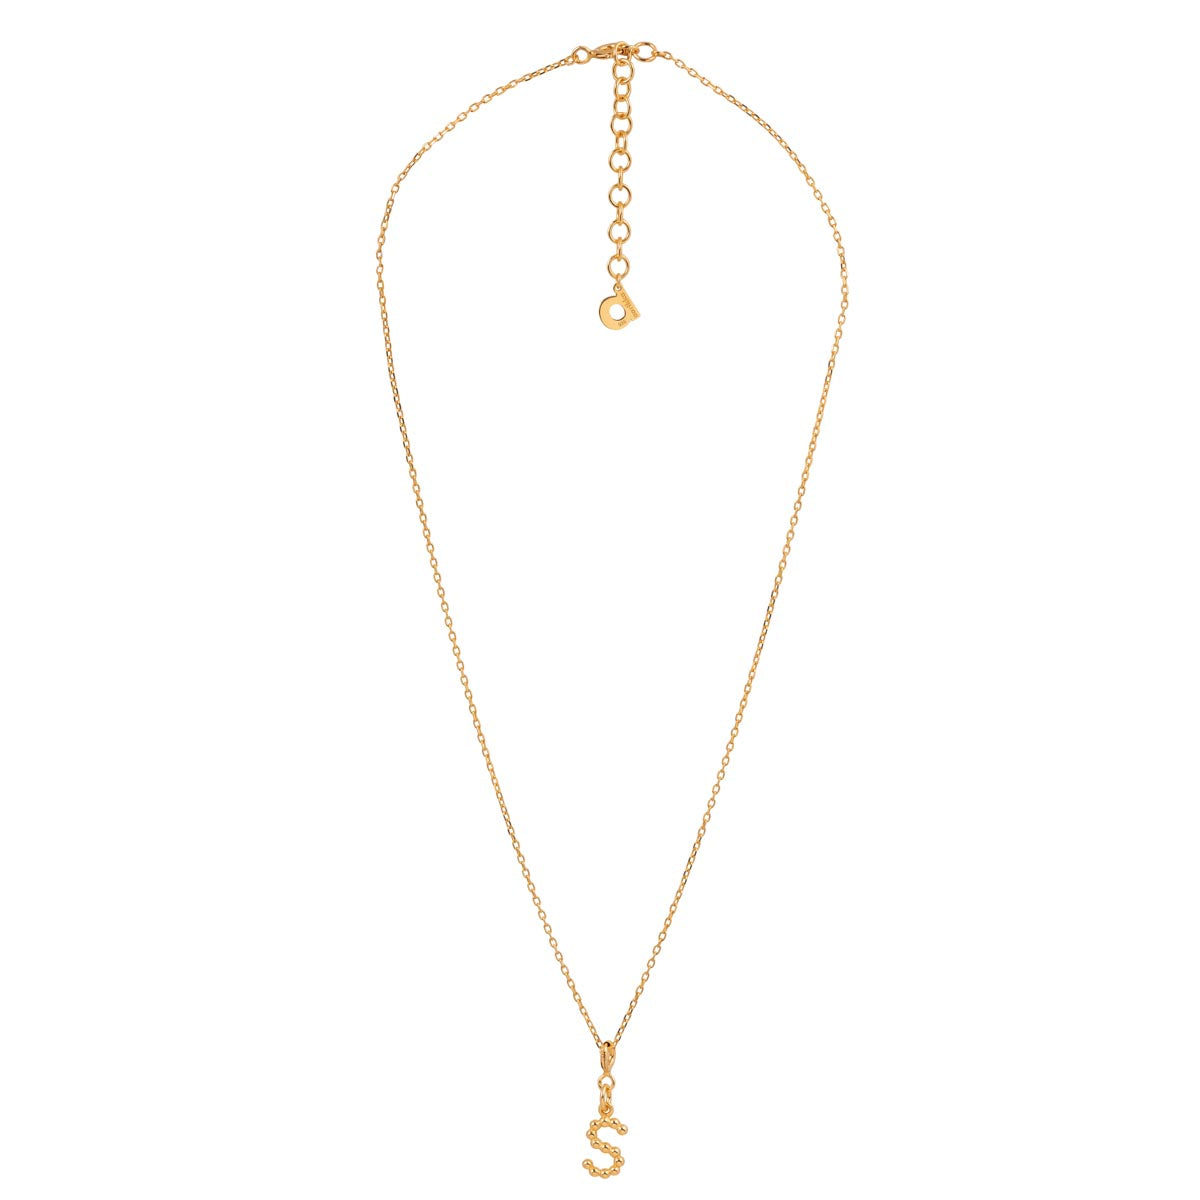 Yllätys Monogram Necklace S, gold-plated silver